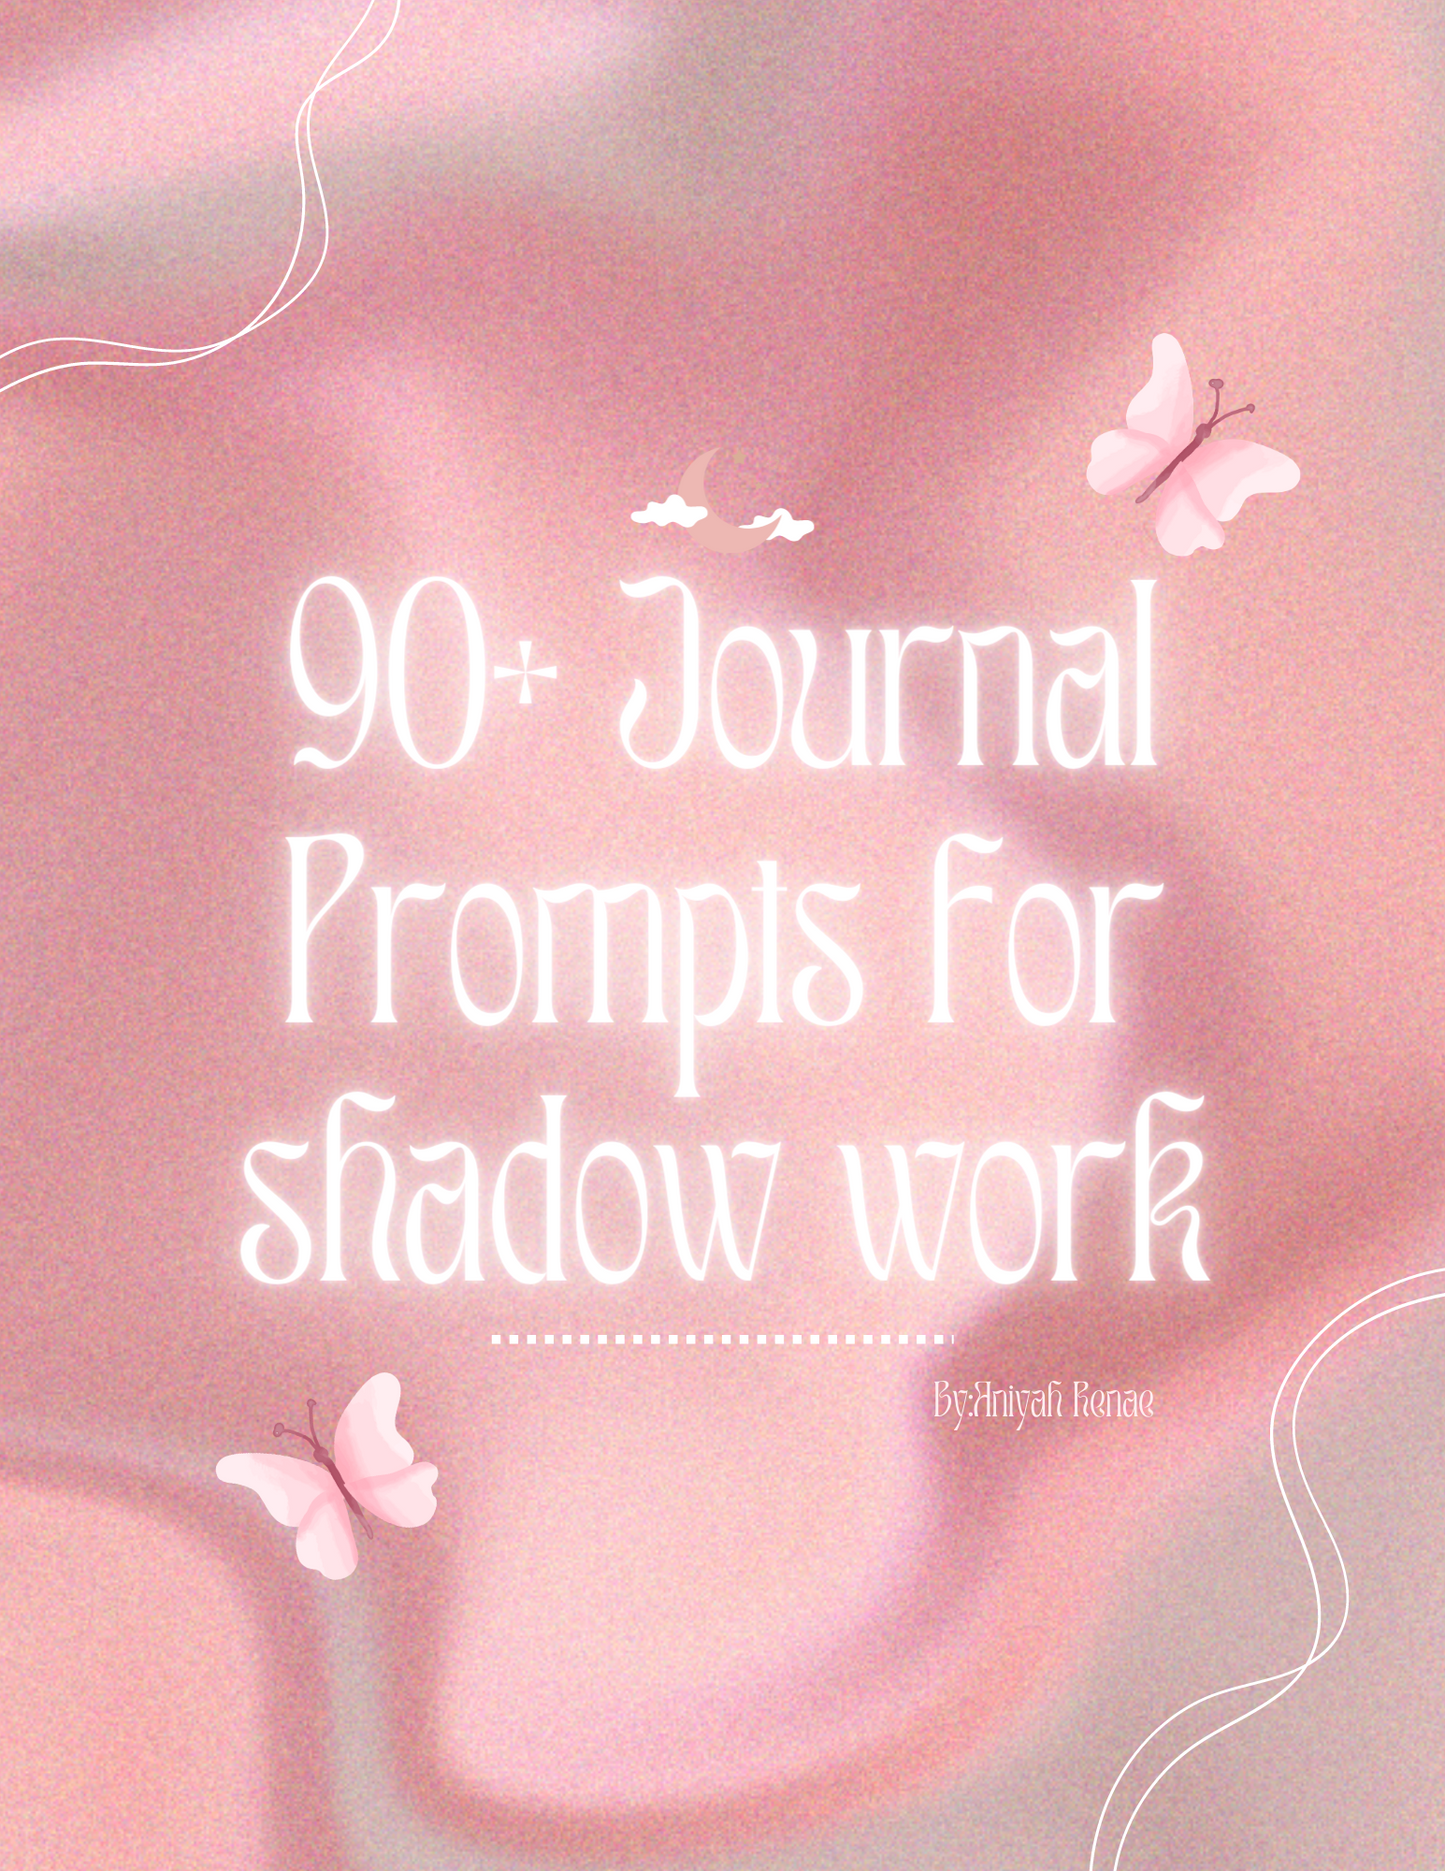 90+ Journal Prompts for shadow work